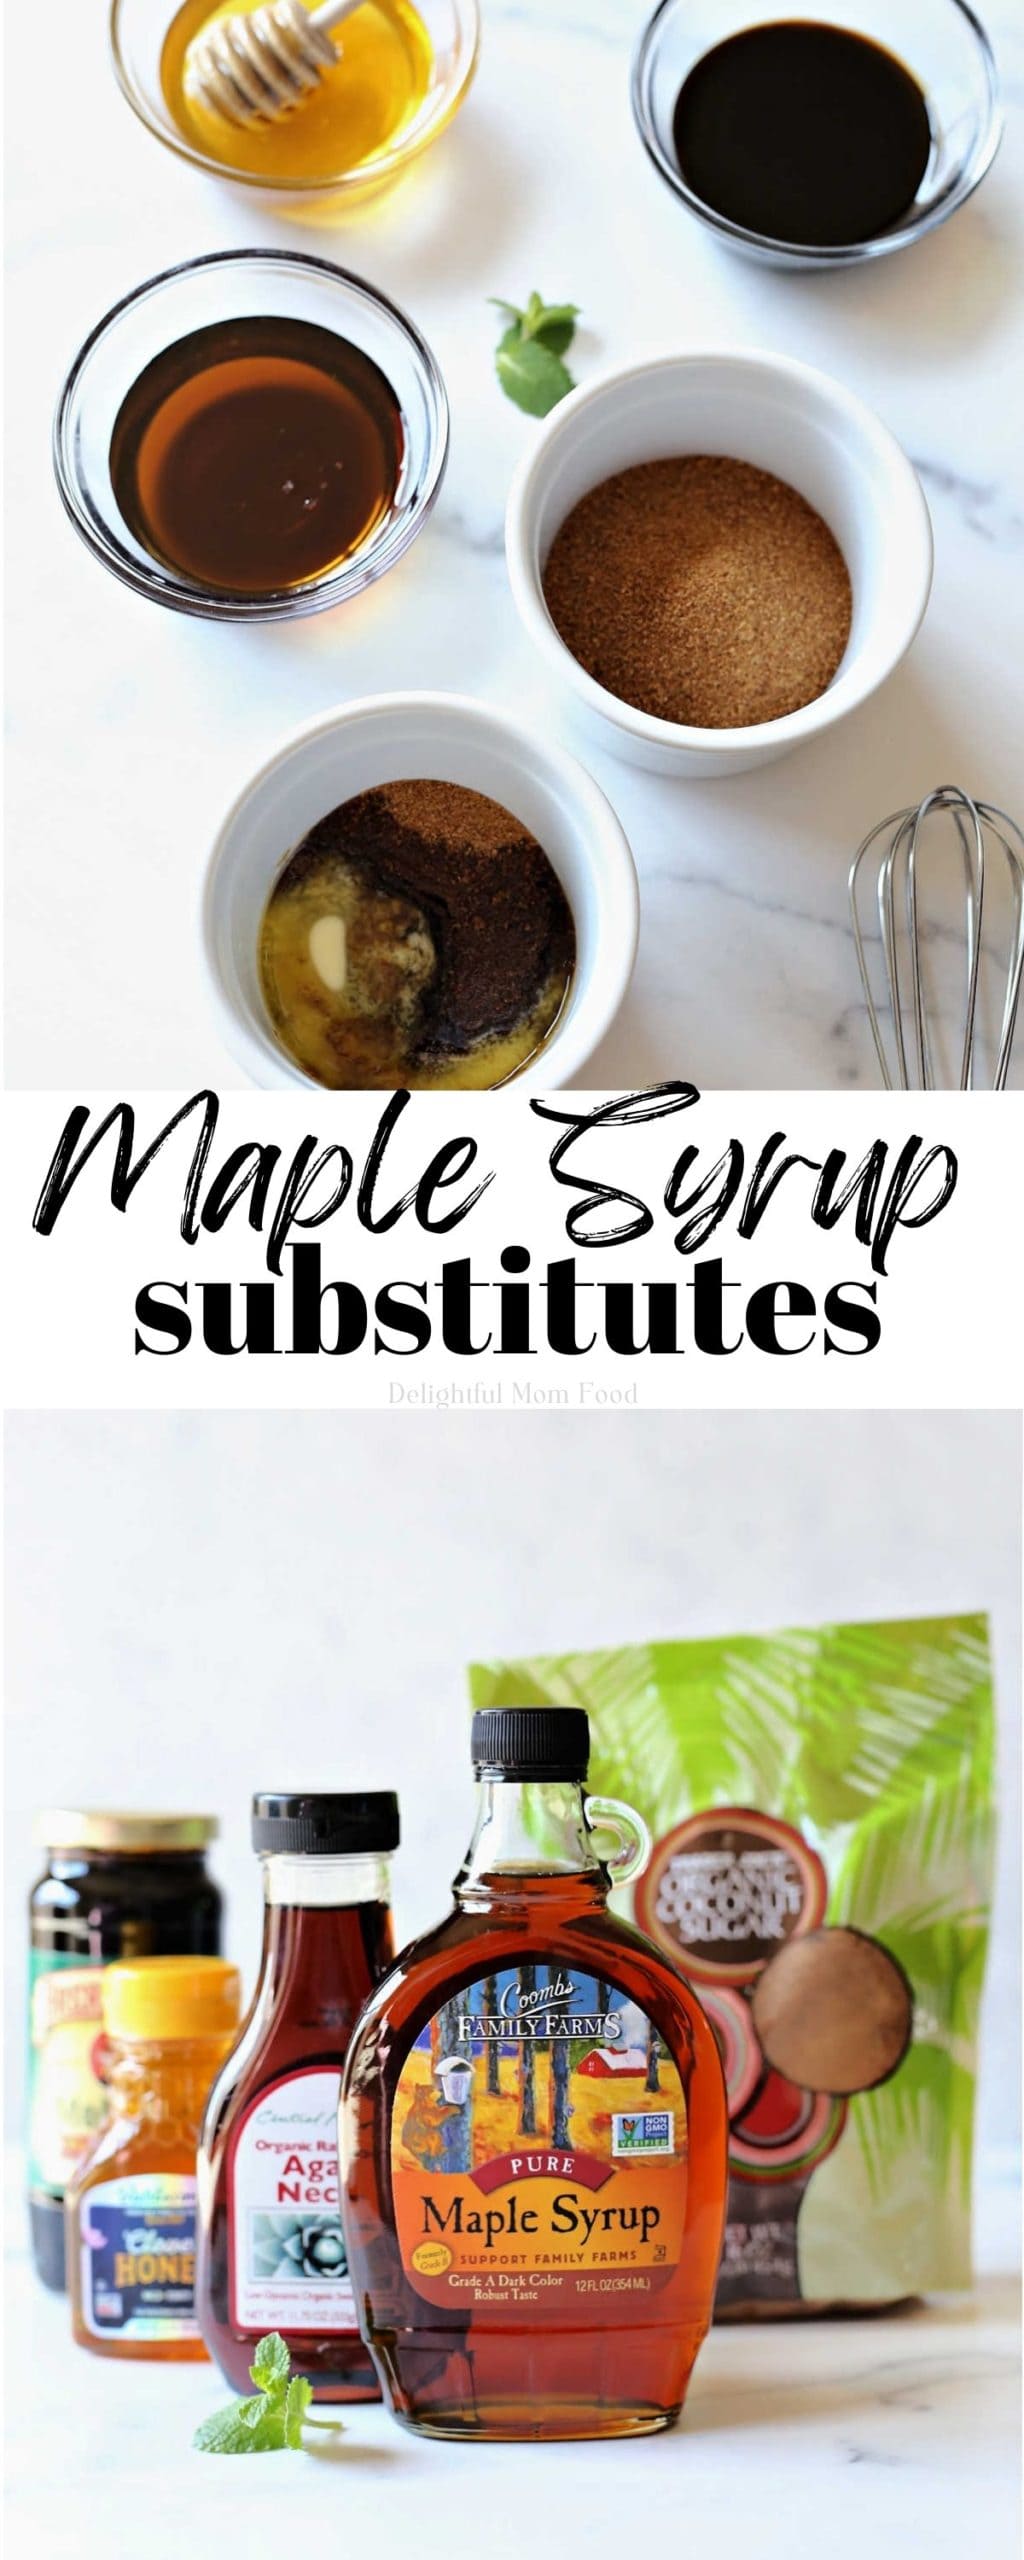 maple syrup and substitute that can be used in its place of honey, agave nectar, coconut sugar, sugar, molasses